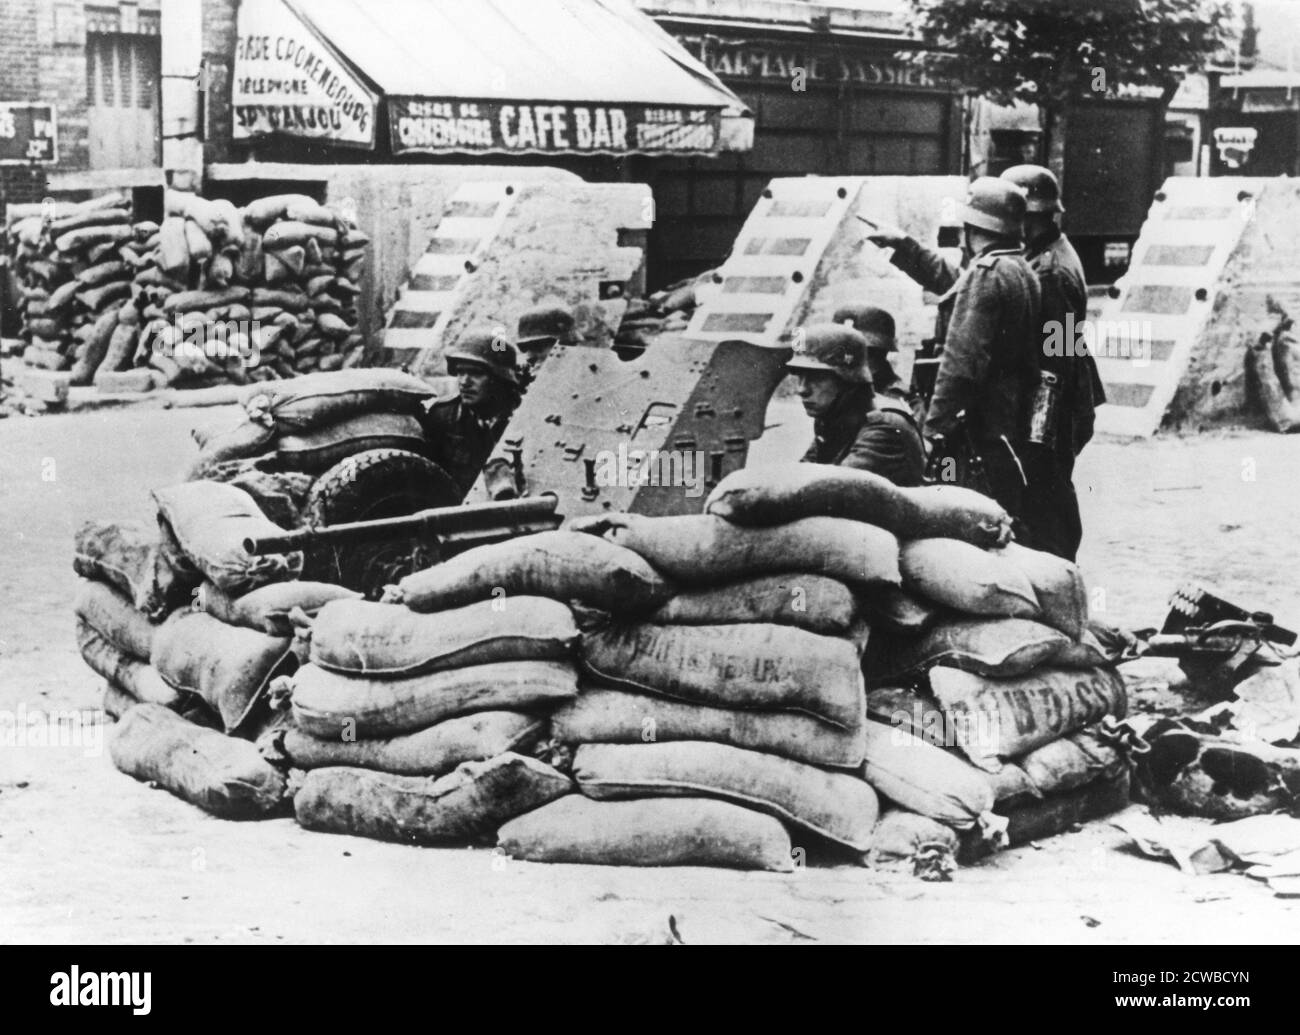 German soldiers with captured French barricade, near Paris, June 1940. The first German troops entered Paris, which had been declared an open city by the French government, on 14 June. The photographer is unknown. Stock Photo